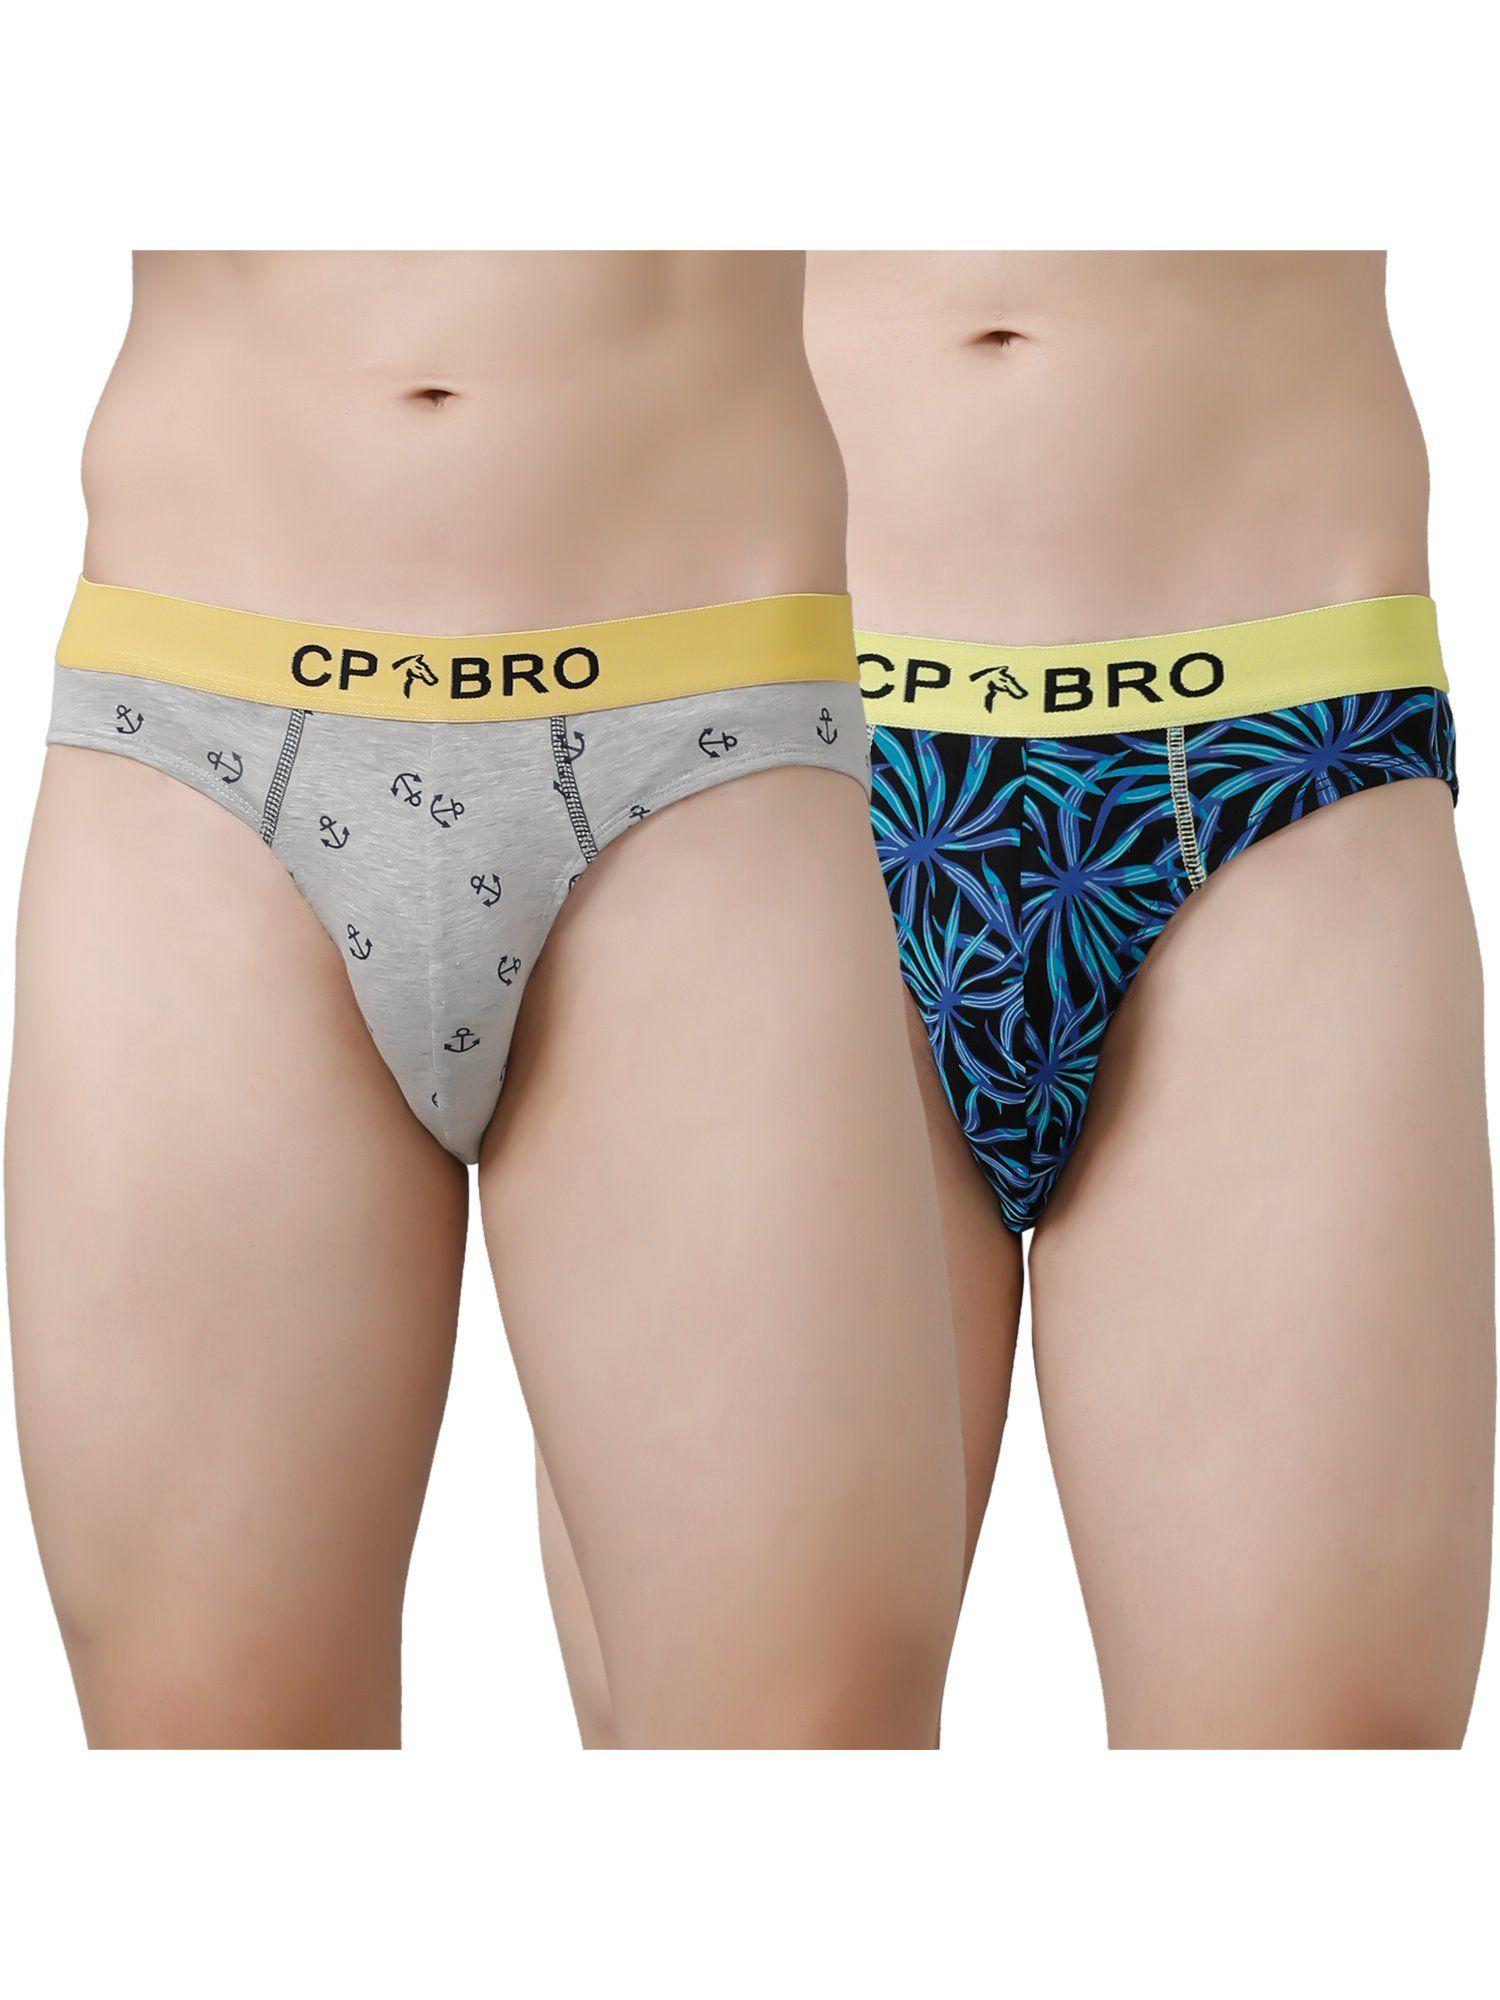 printed briefs with exposed waistband value - grey anchor & blue leaf (pack of 2)